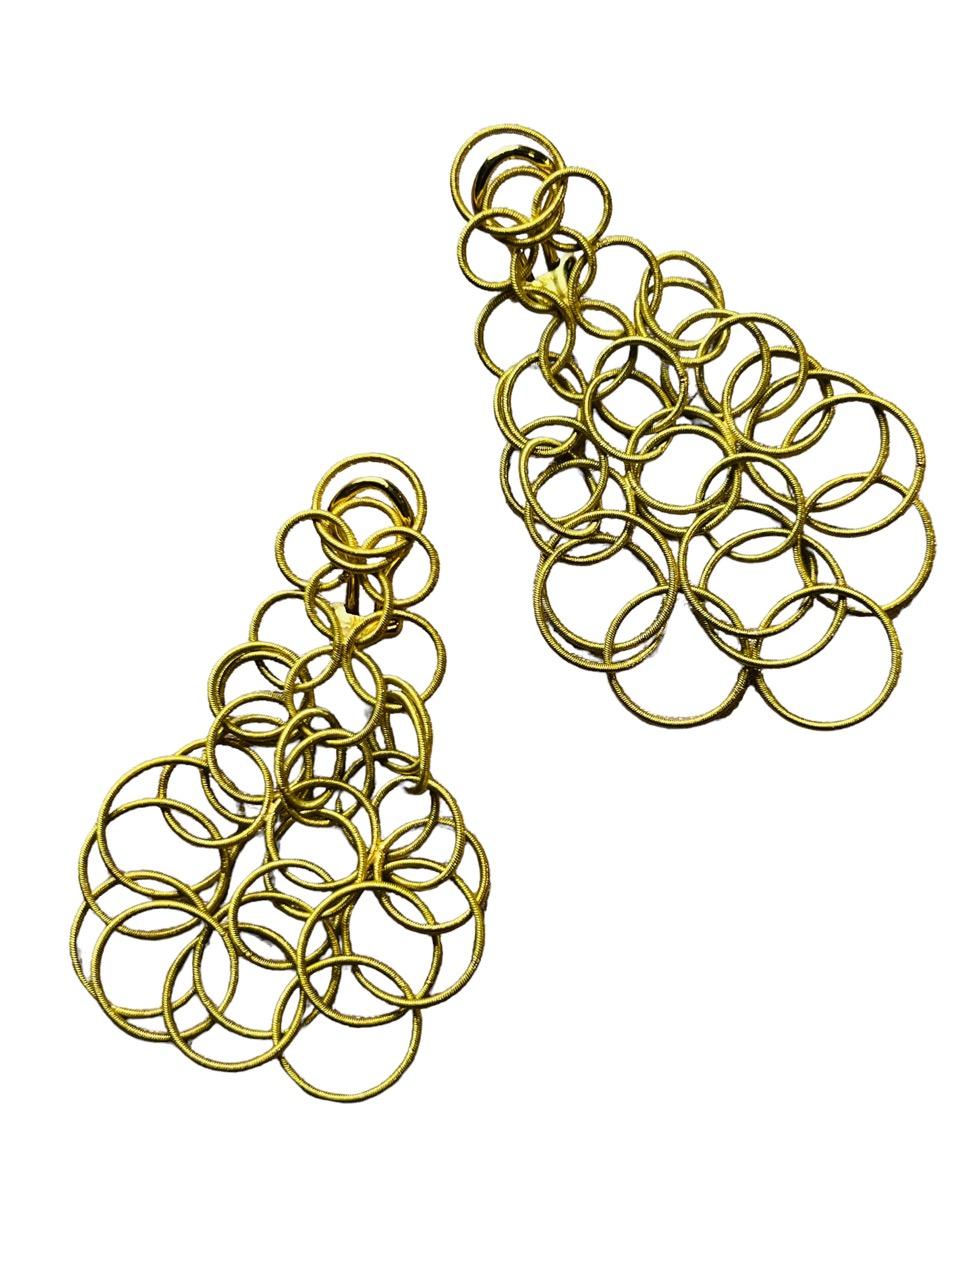 Pair of Earrings Signed Buccellati in 18 Carat Yellow Gold 3